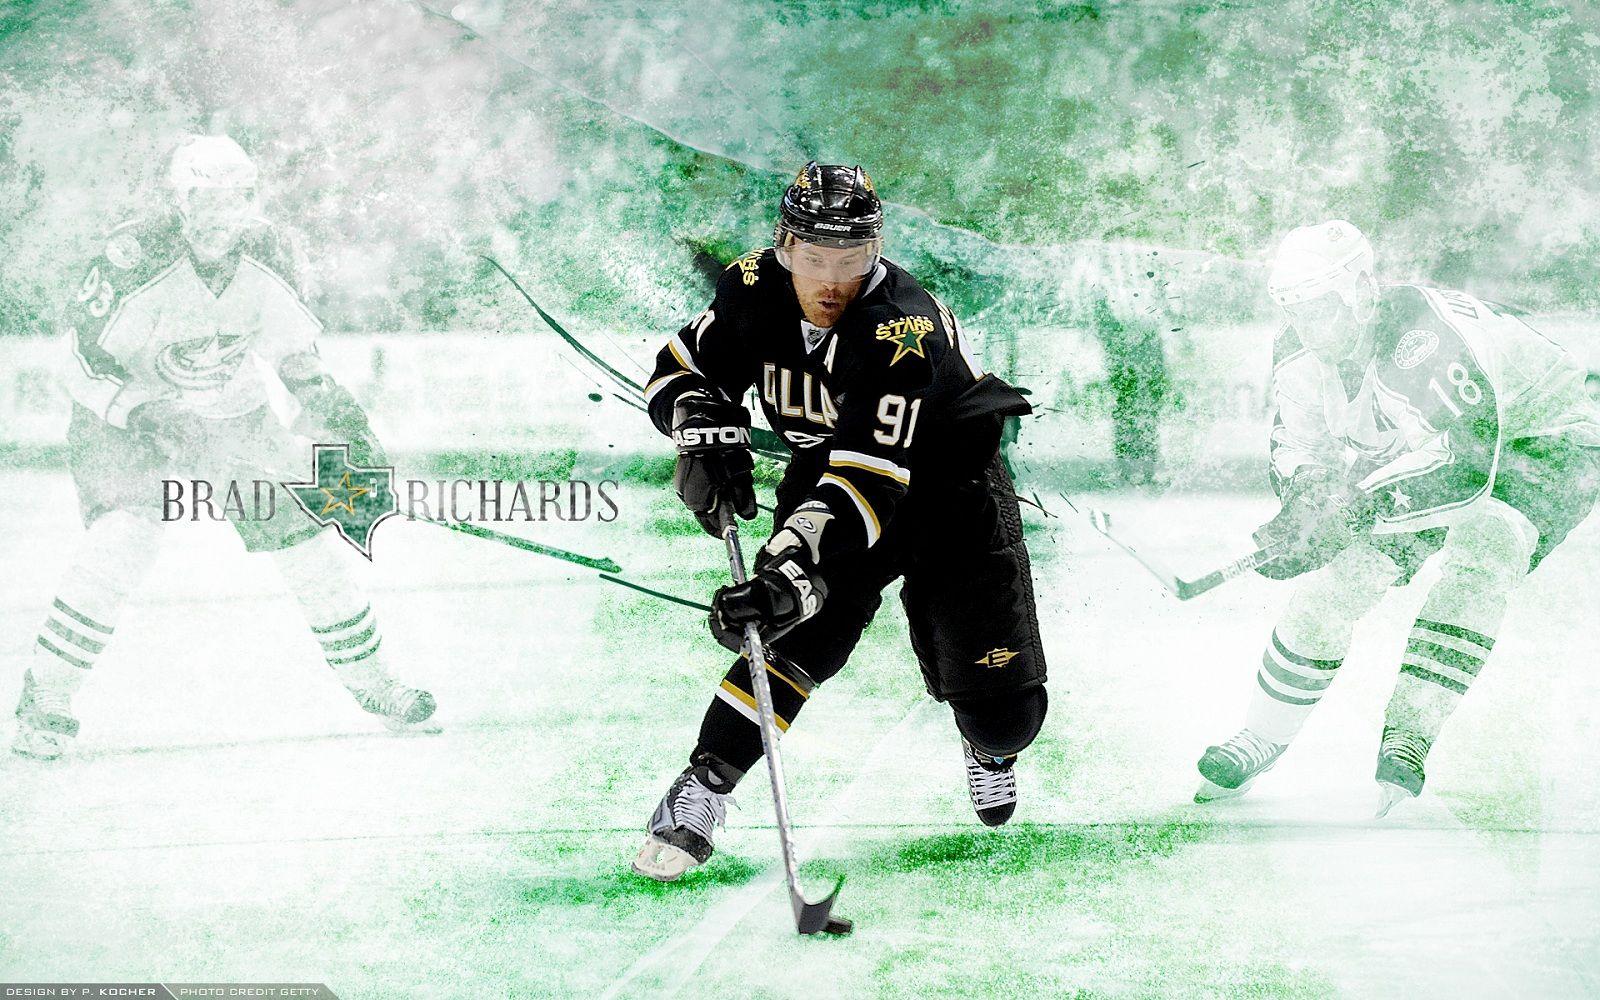 Dallas Stars Wallpapers For IPhone (72+ images)